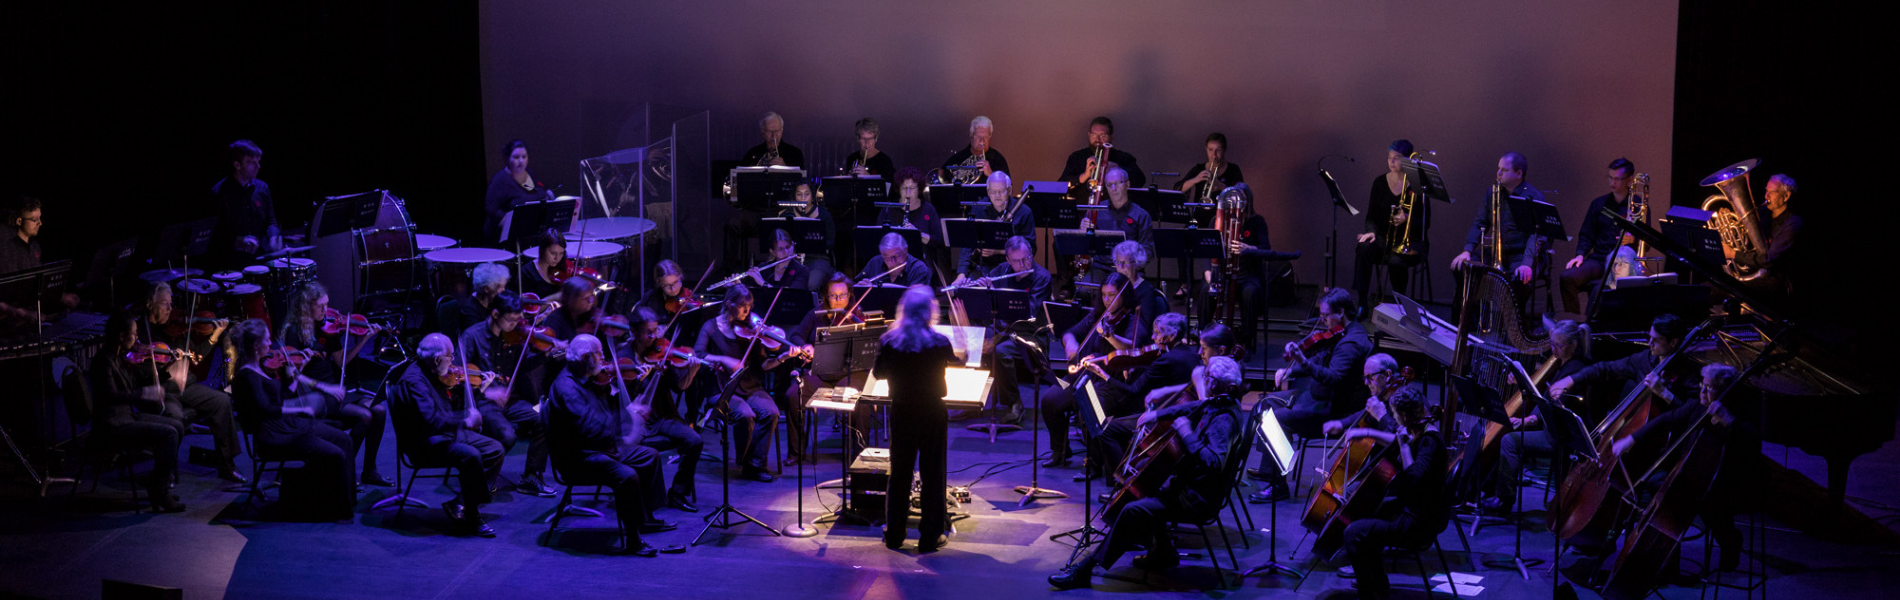 Fredericton Symphony Orchestra on stage in purple lighting